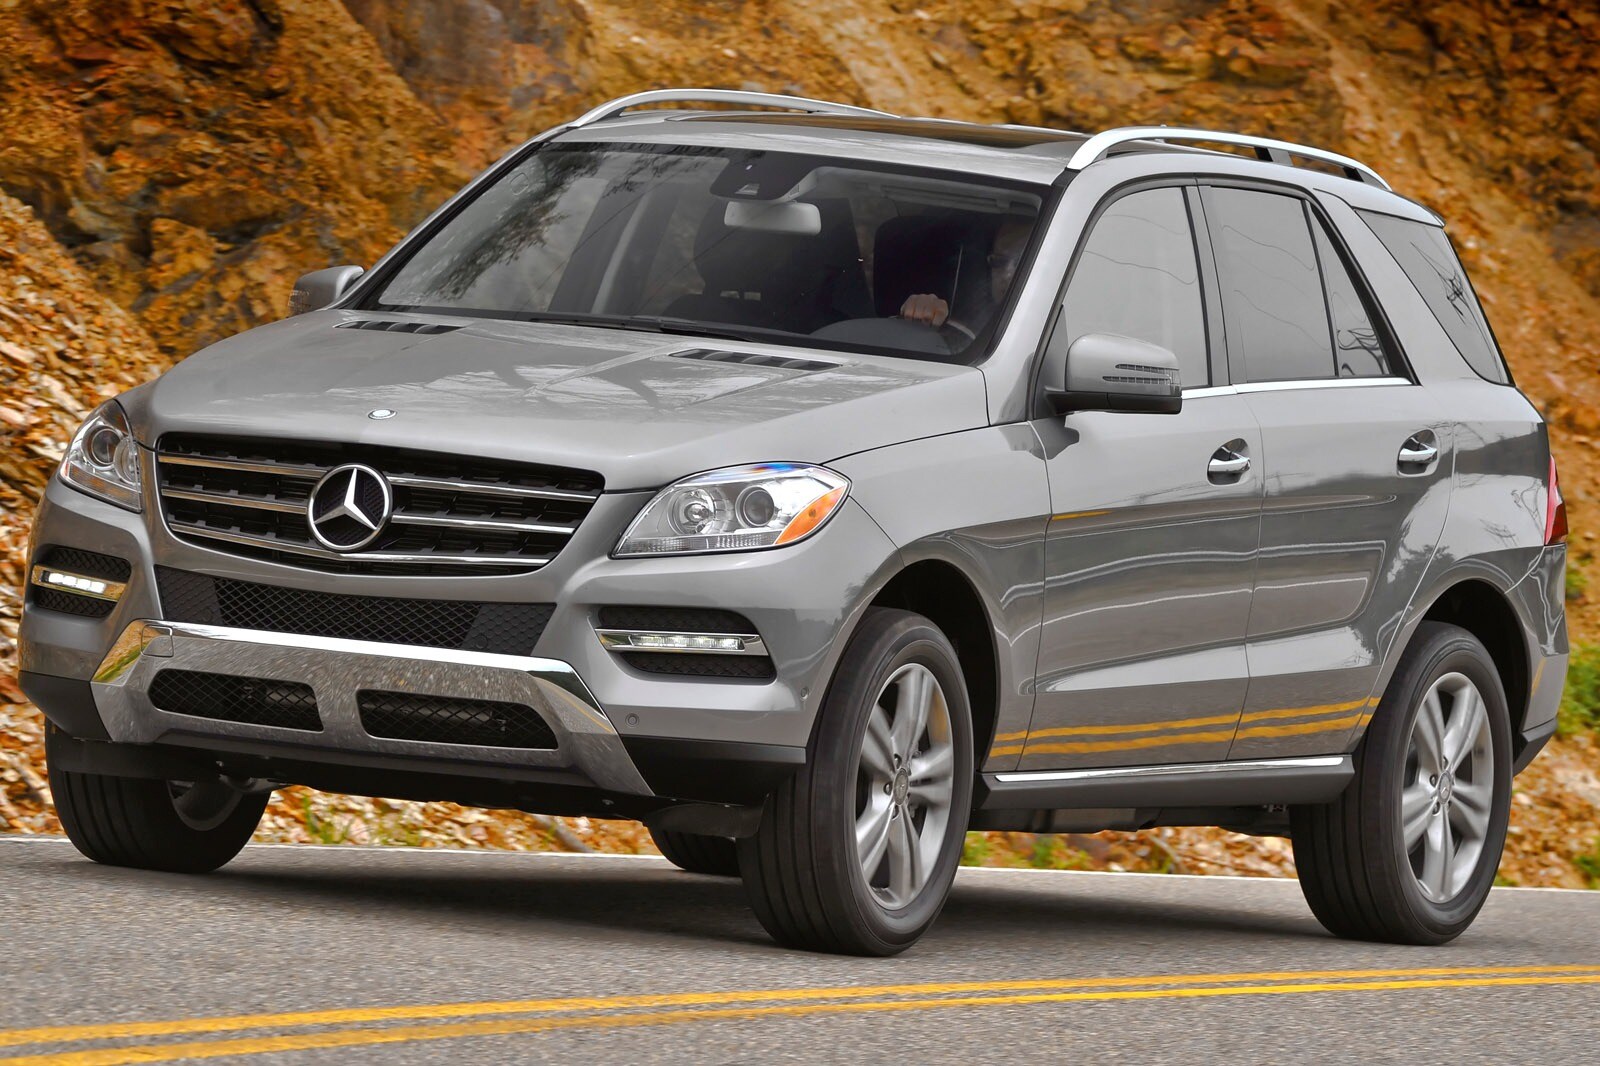 Used 2015 Mercedes Benz M Class Suv Review Edmunds